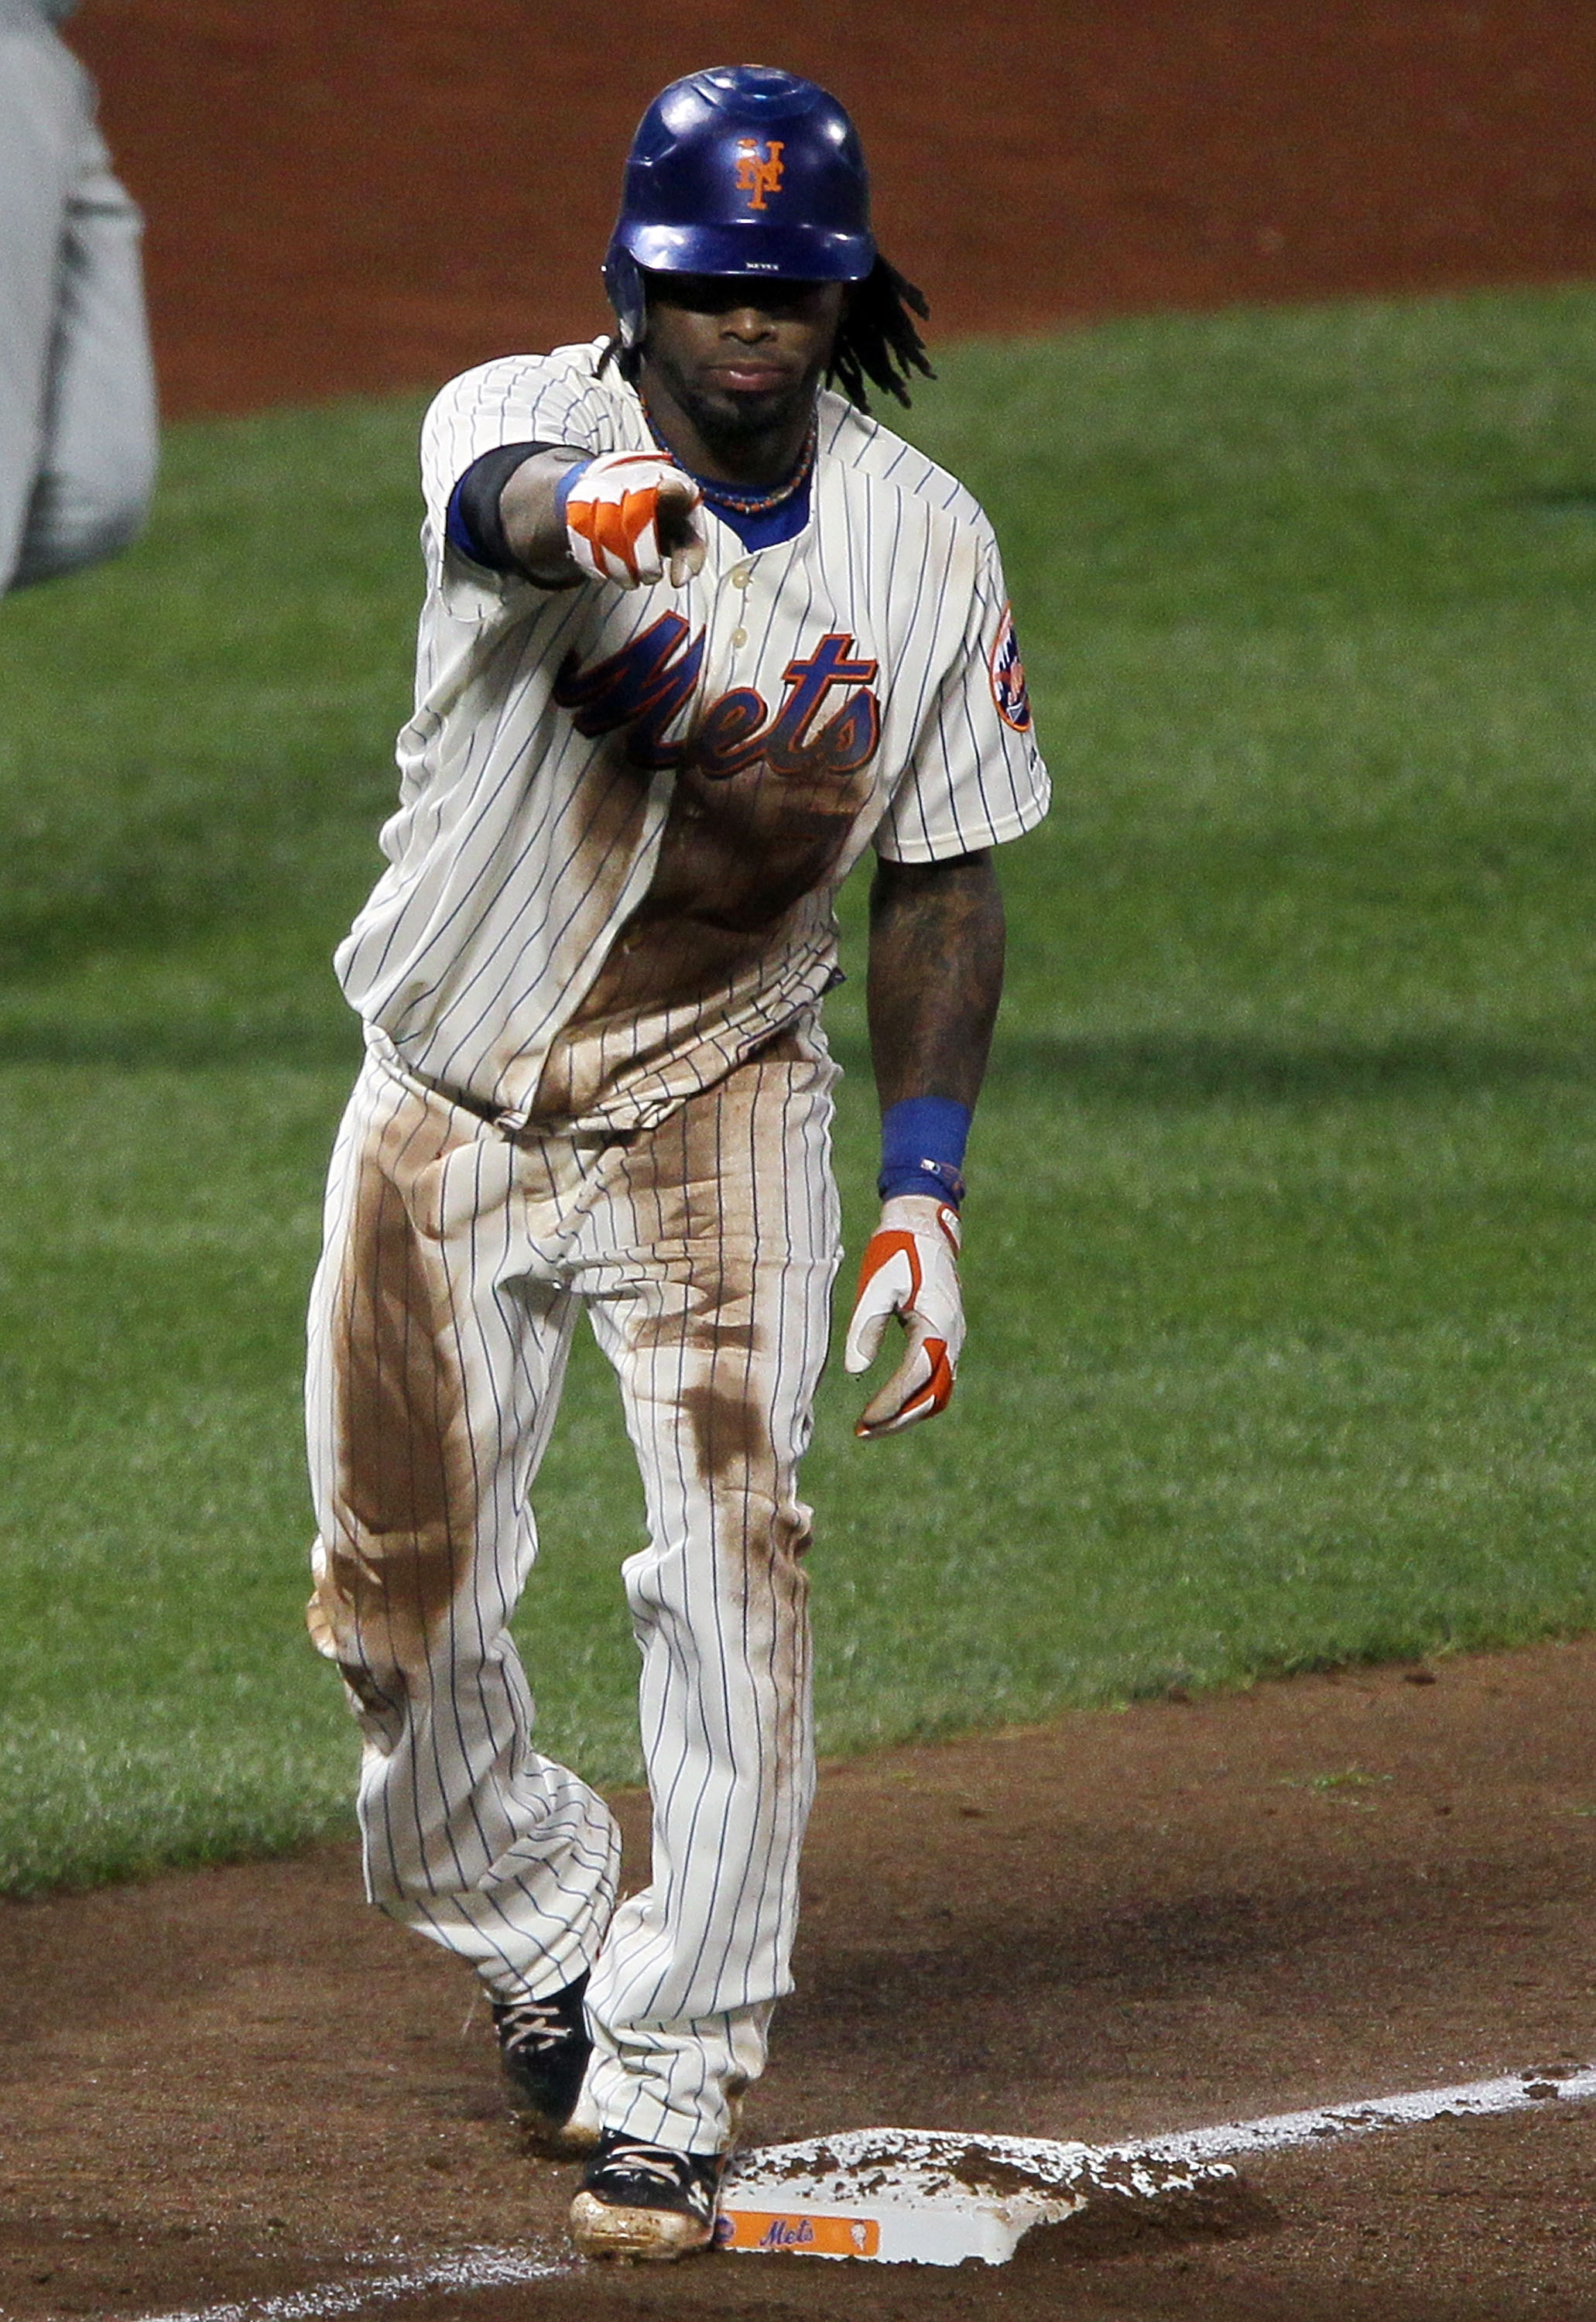 Mets Top Marlins as Jose Reyes Excels Against His Former Team - The New  York Times